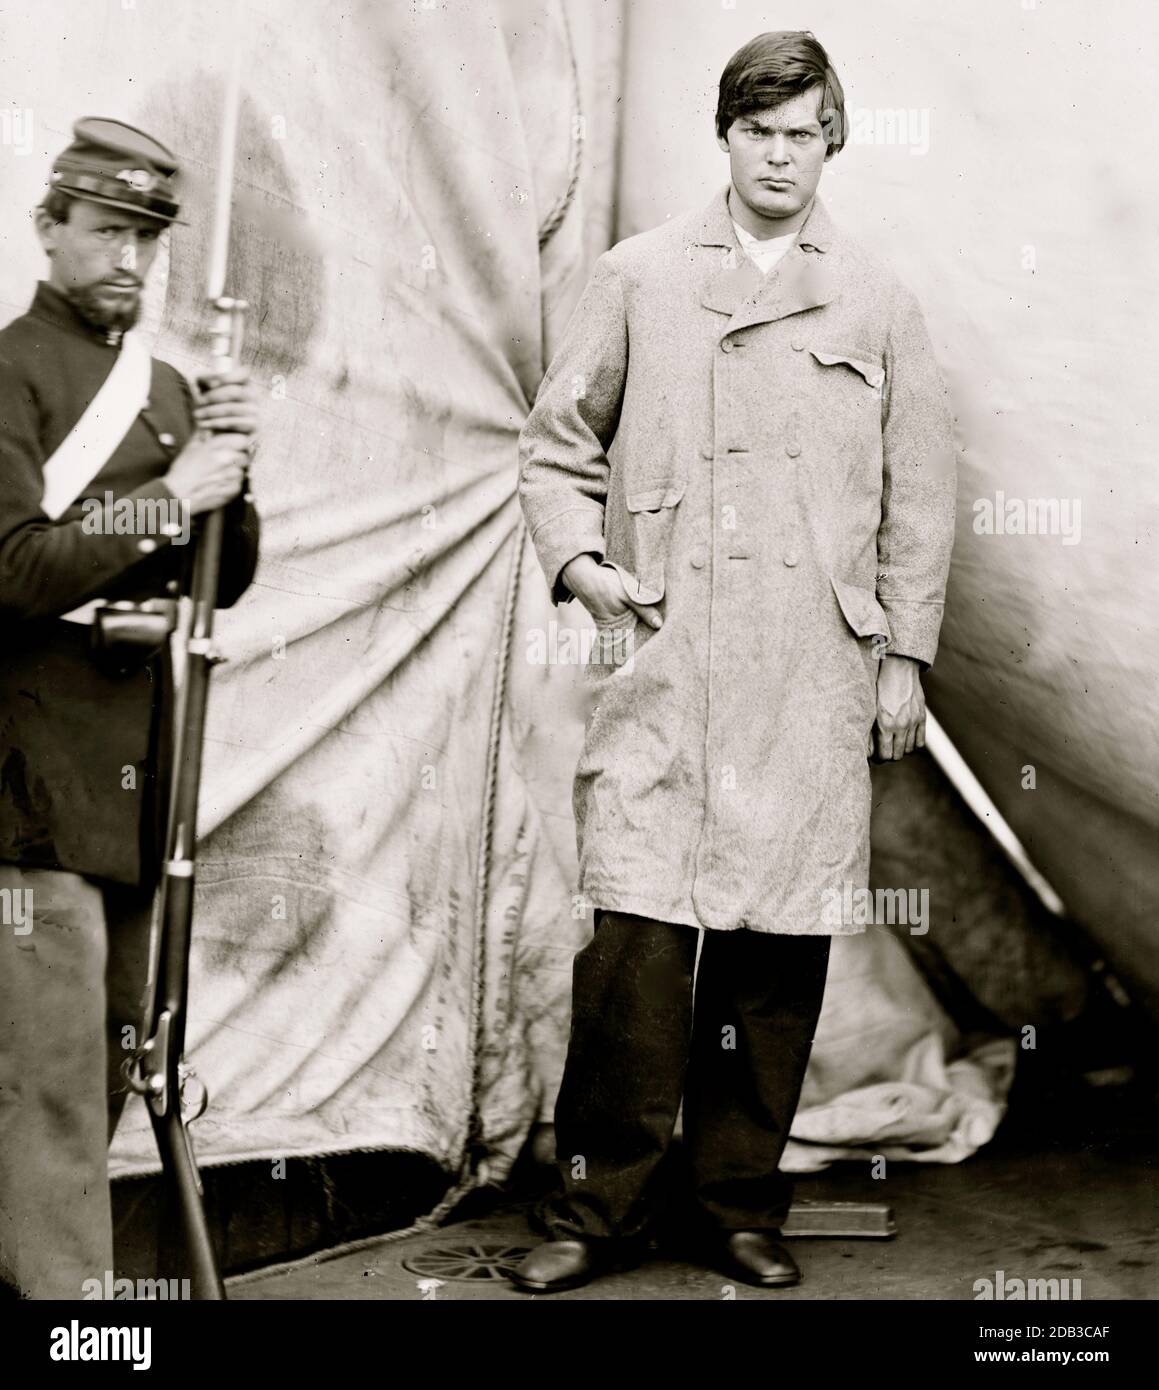 Washington Navy Yard, District of Columbia. Lewis Payne, standing in overcoat and without hat. Federal guard standing on left. Stock Photo